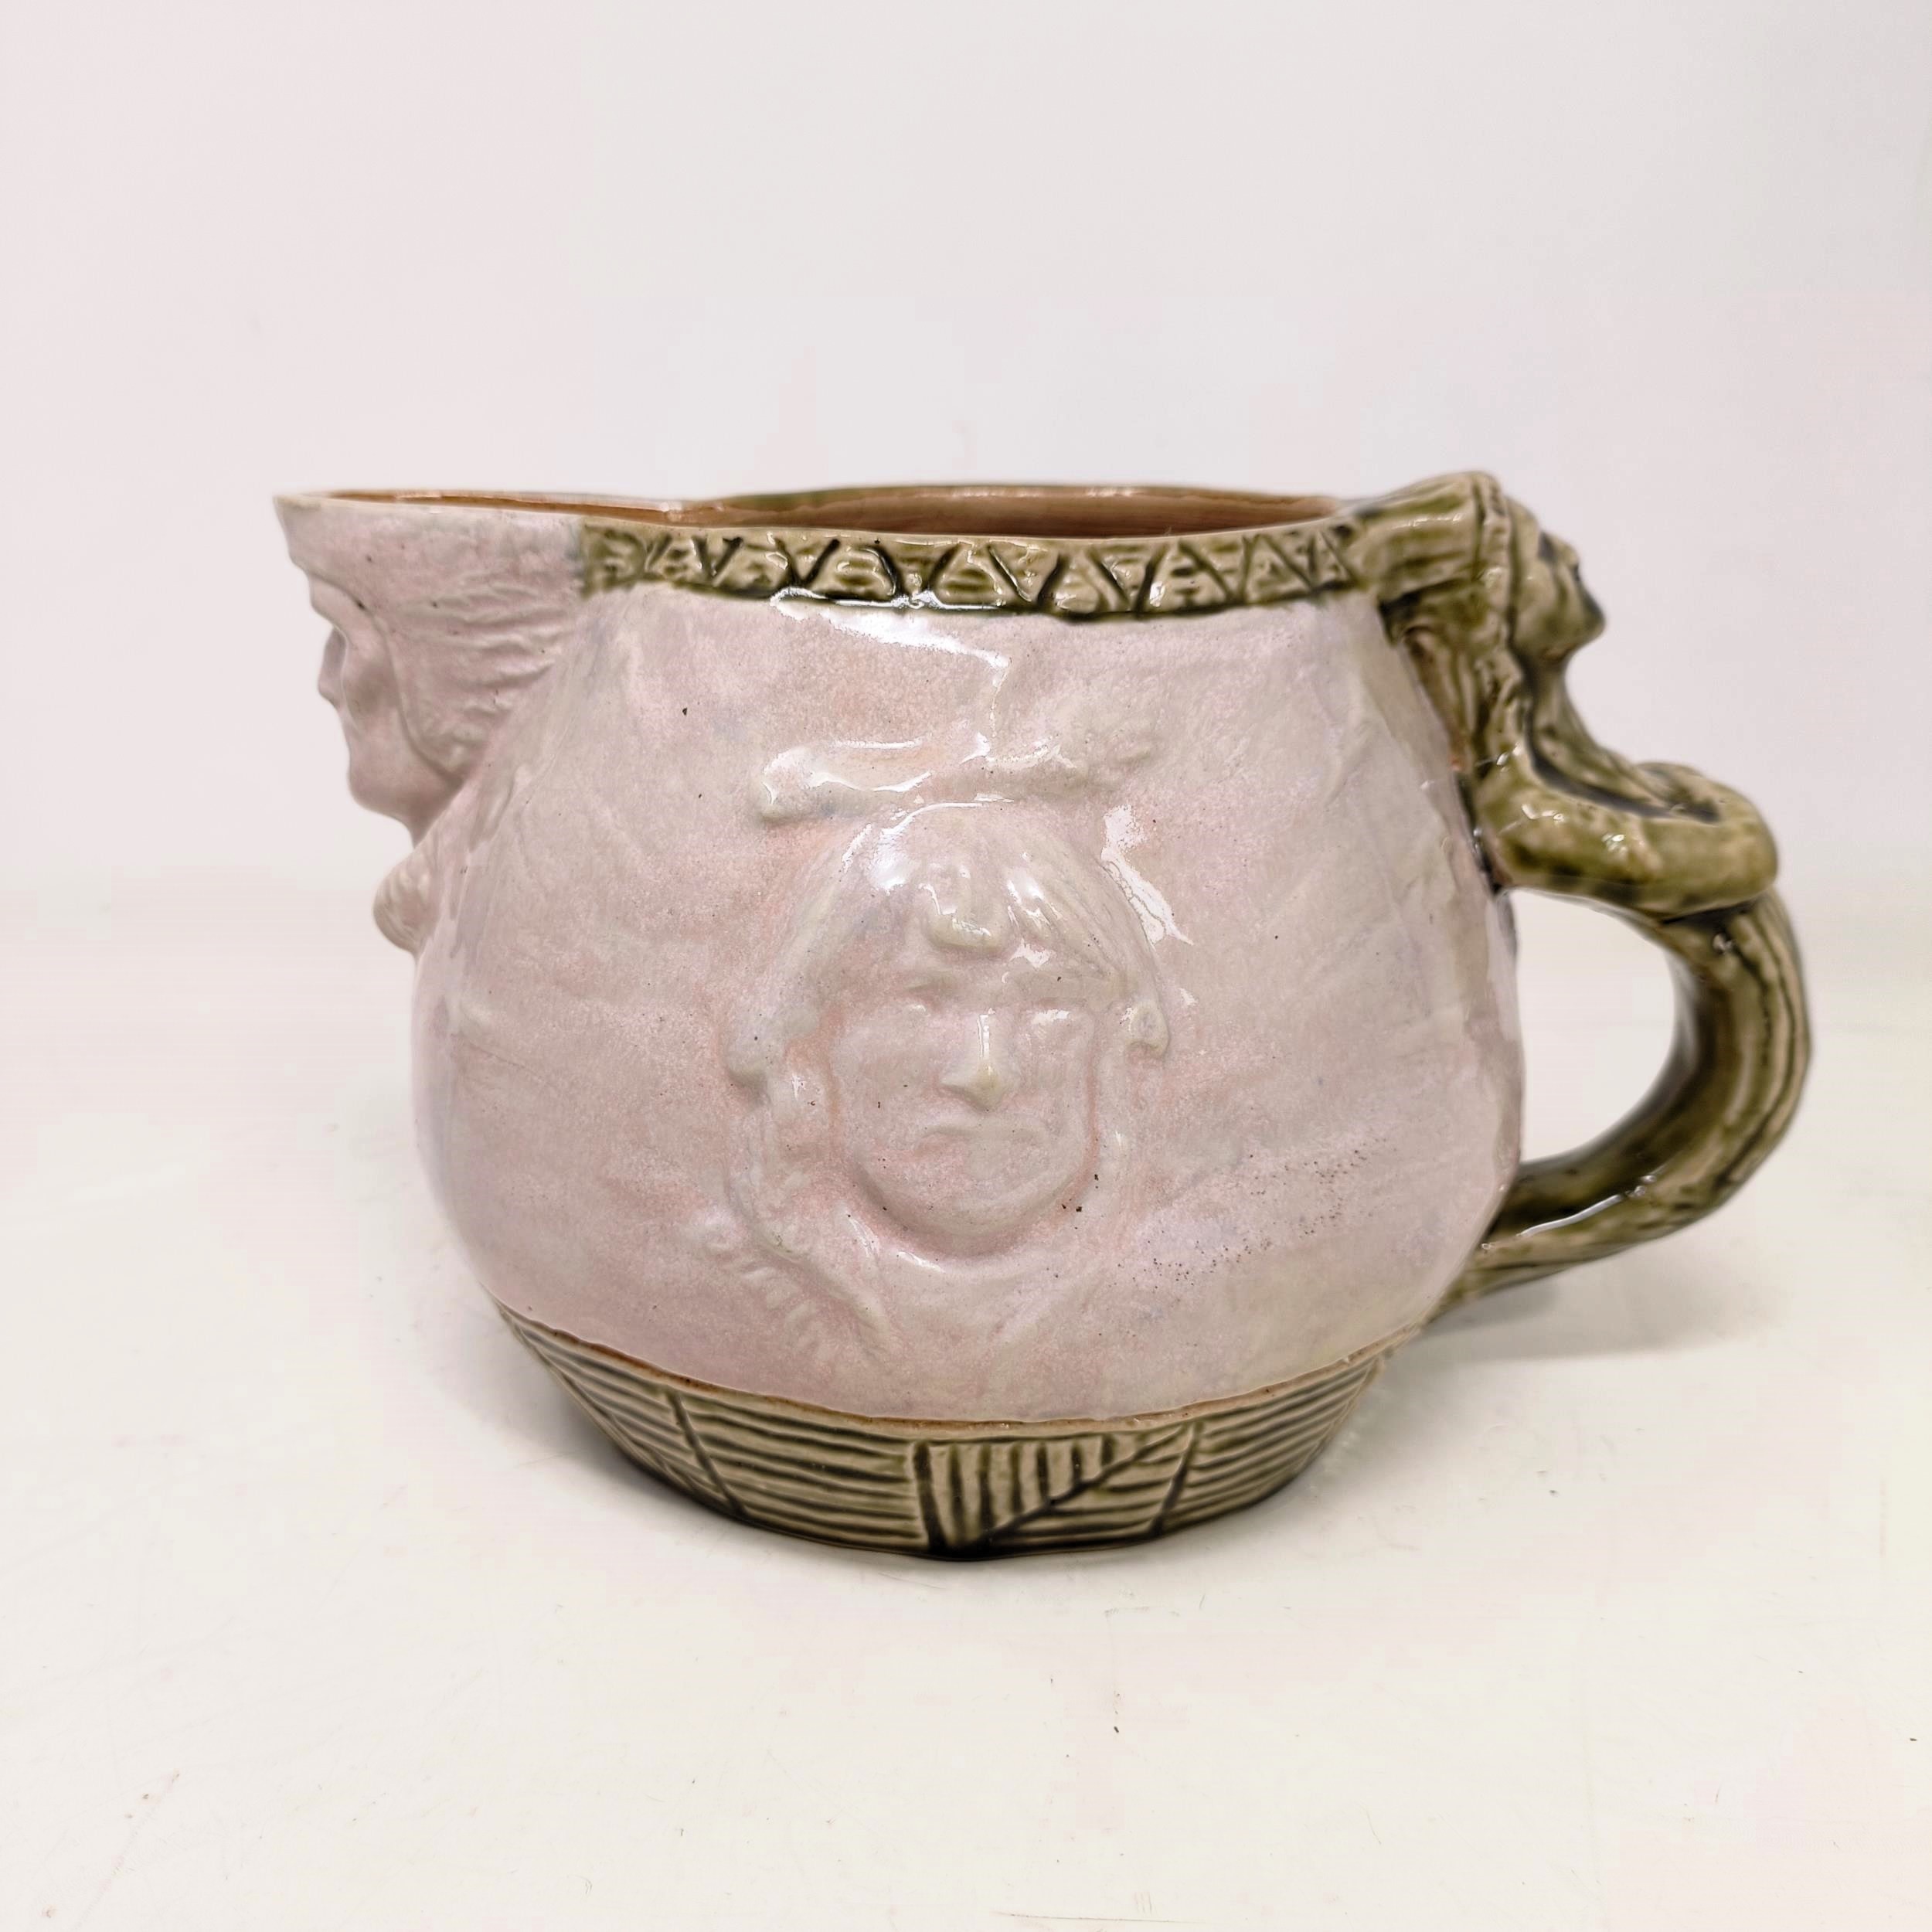 A Doulton Lambeth jug, by Edward Kemeys, decorated with native American Indians, 13 cm high